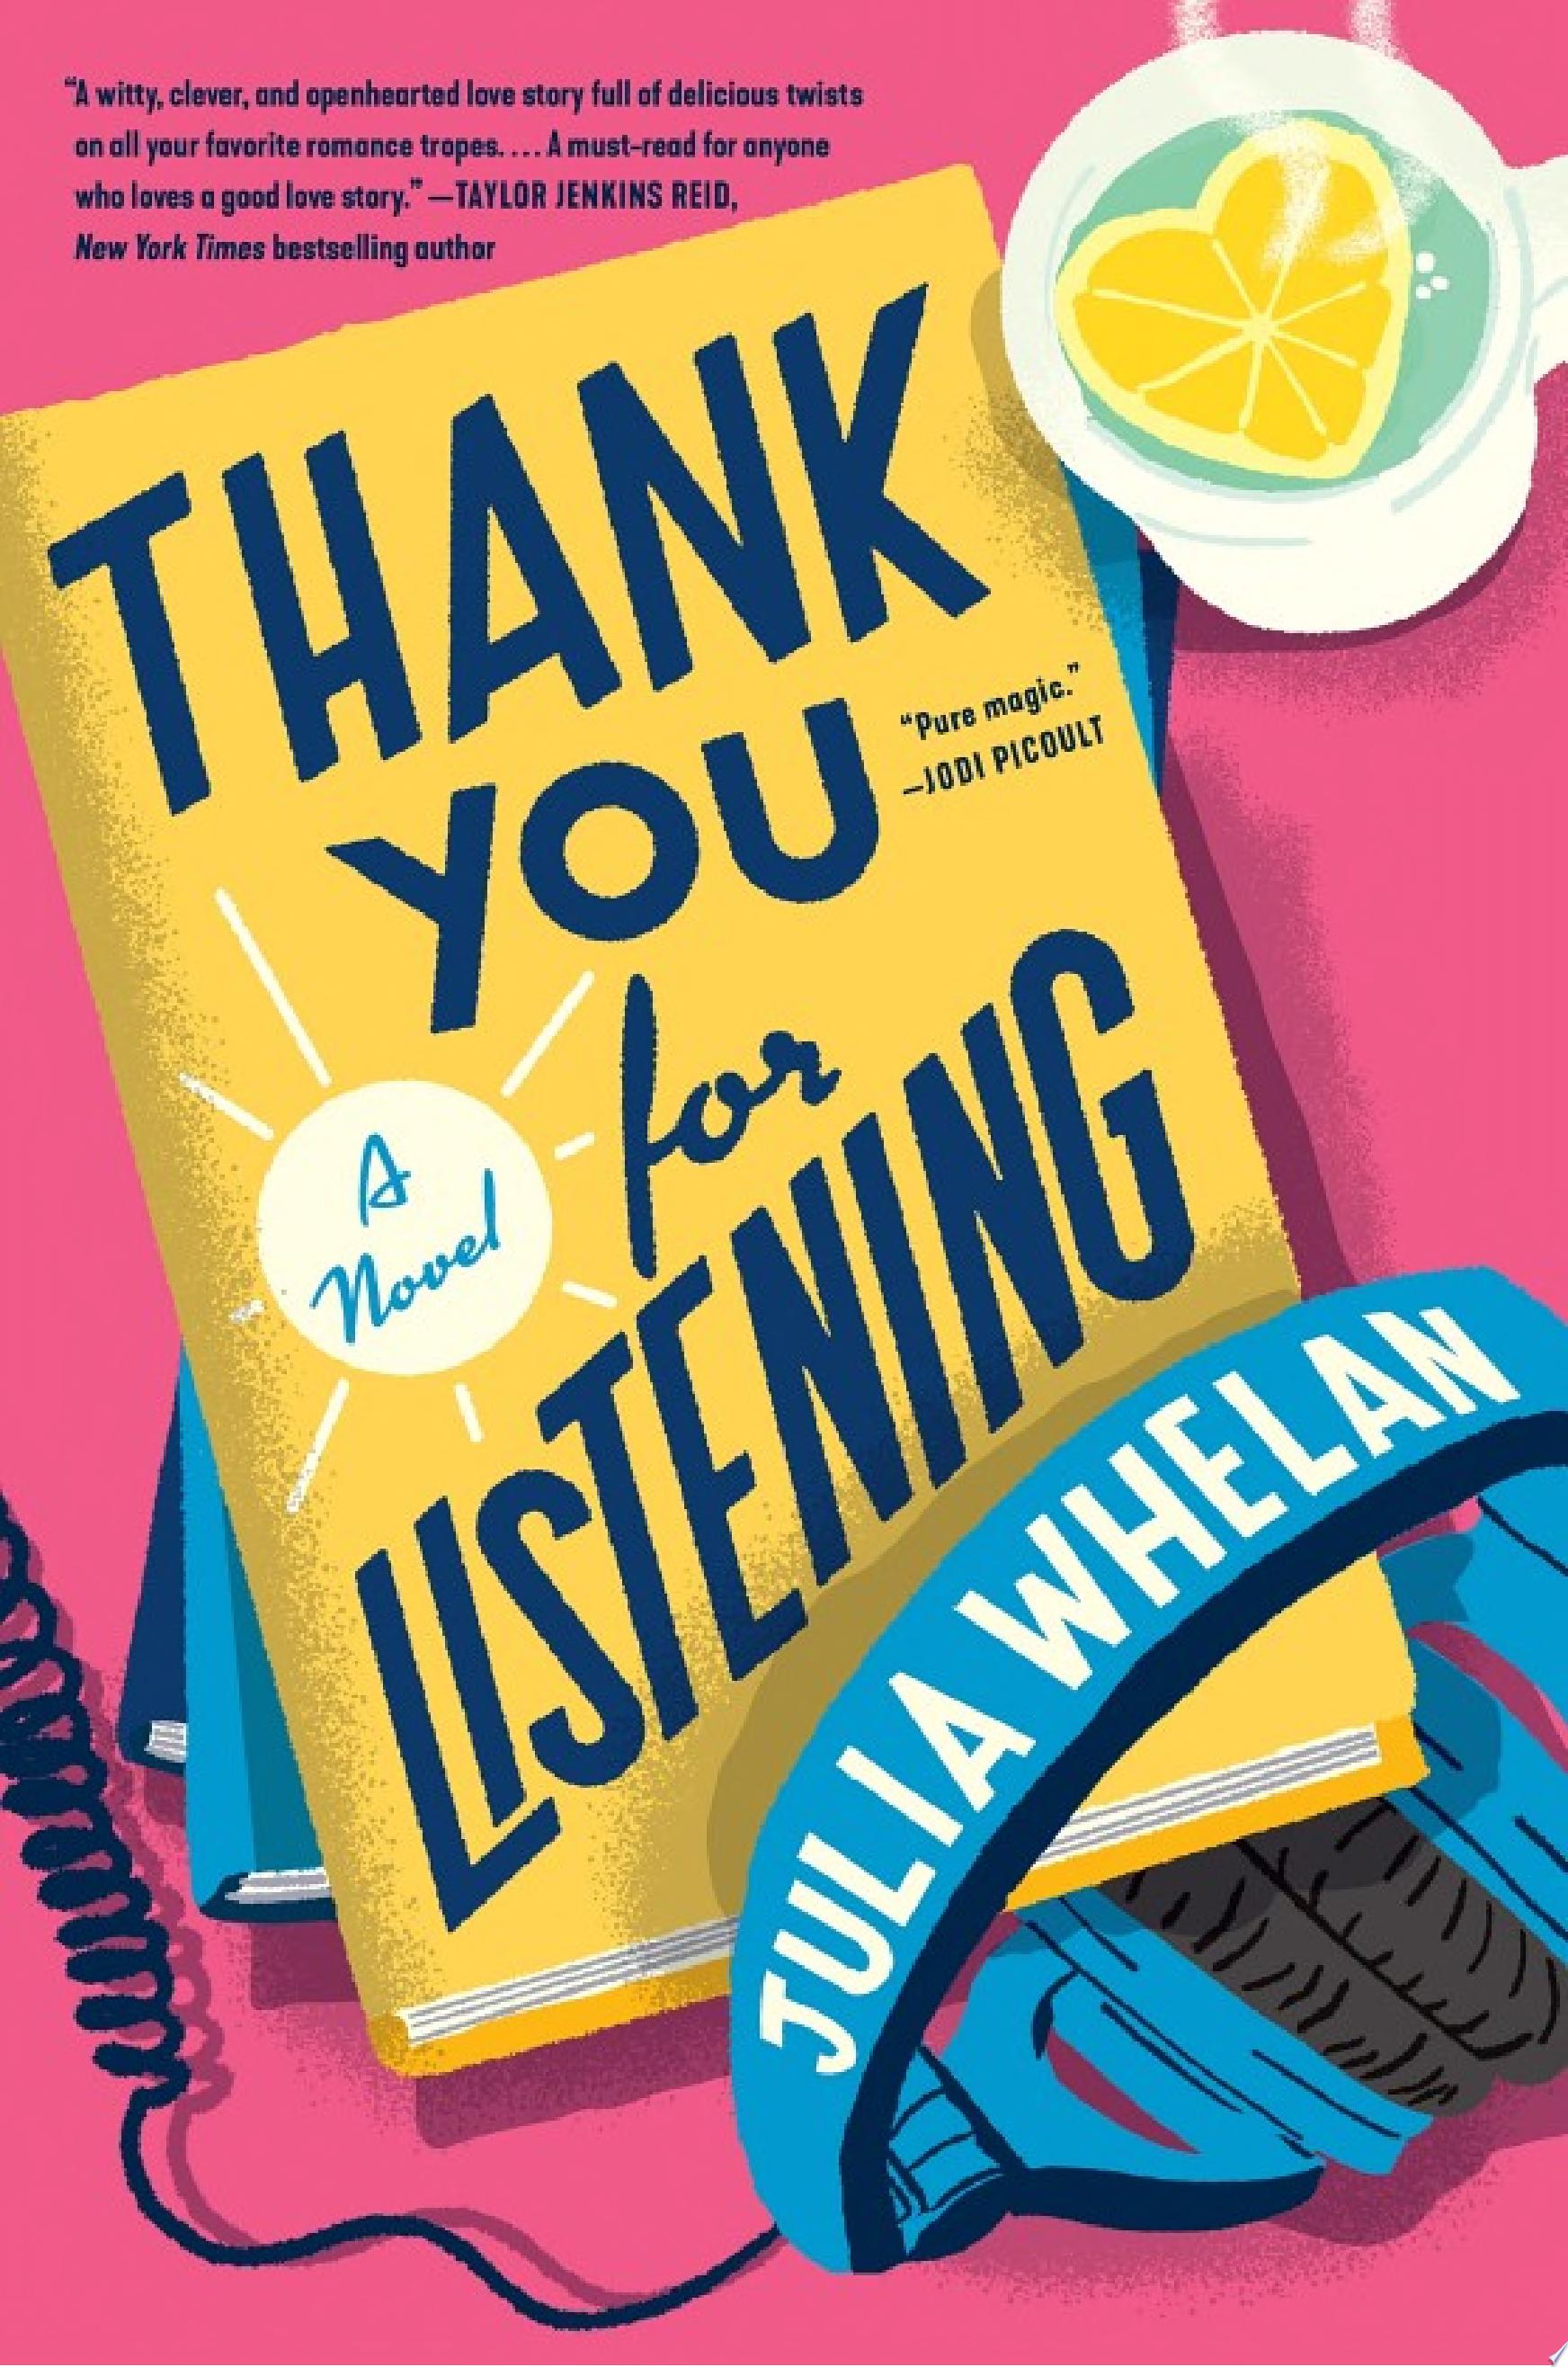 Image for "Thank You for Listening"